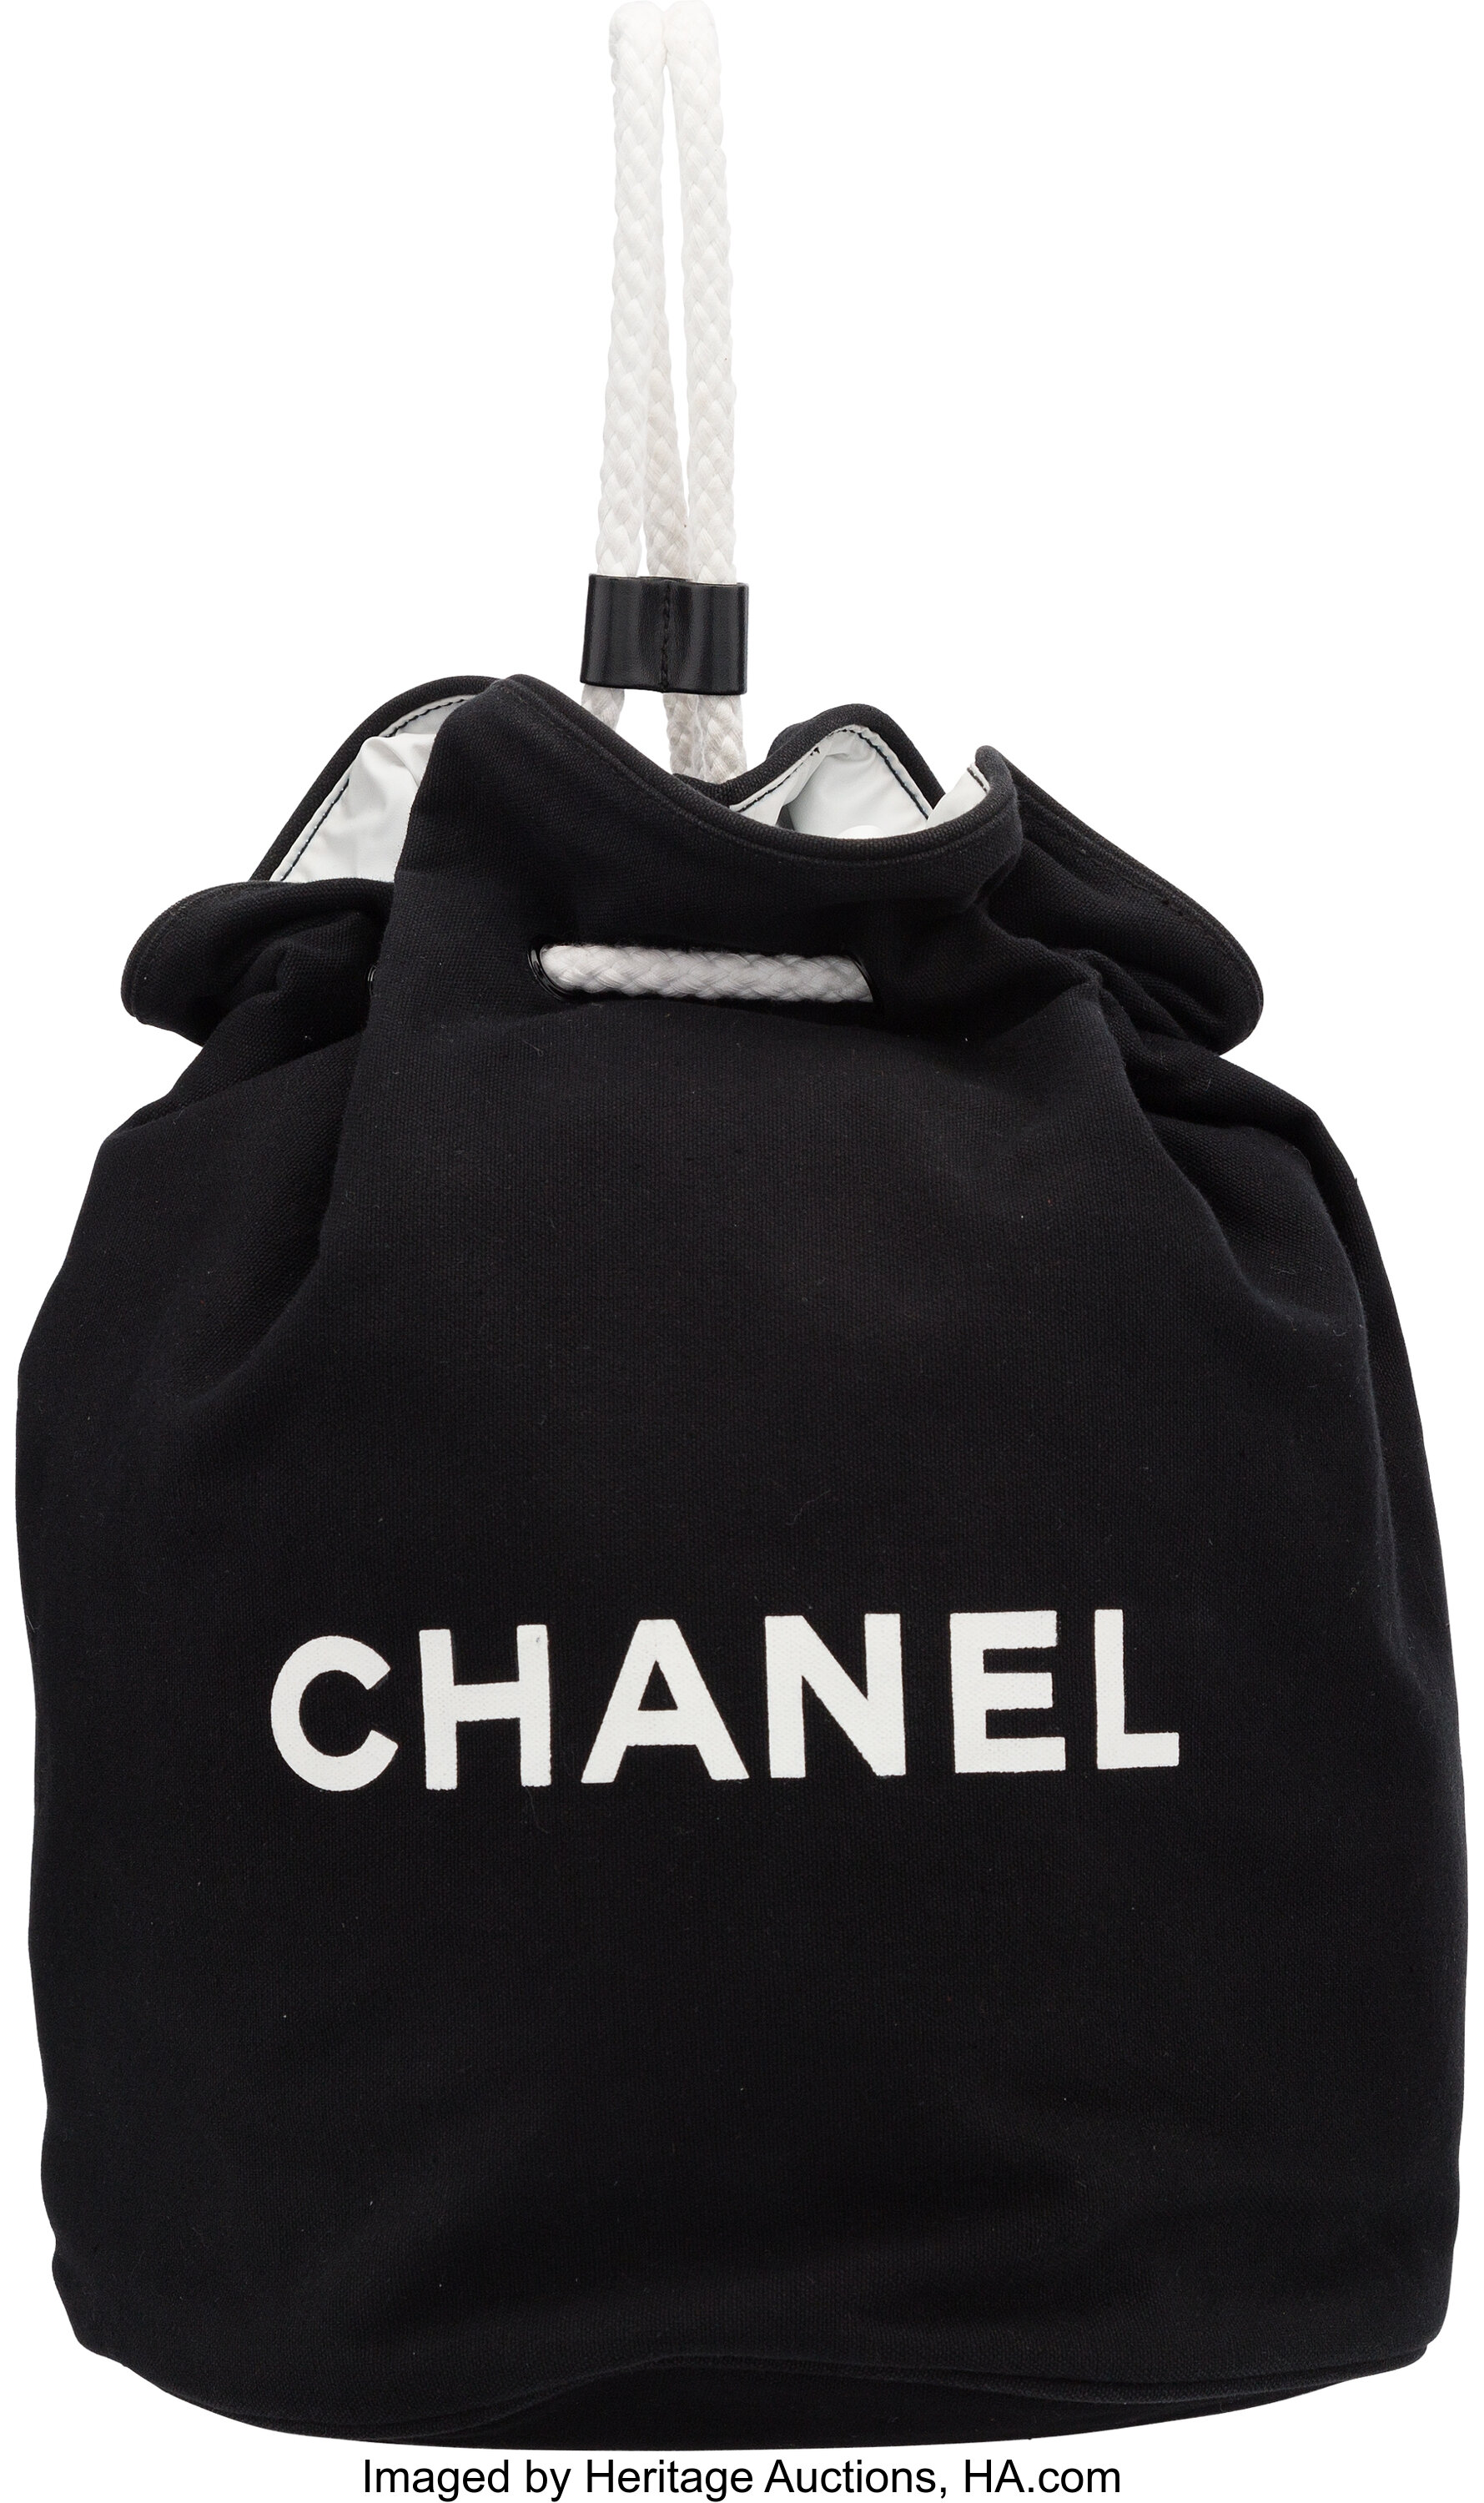 Chanel Black Canvas Drawstring Backpack – The Don's Luxury Goods